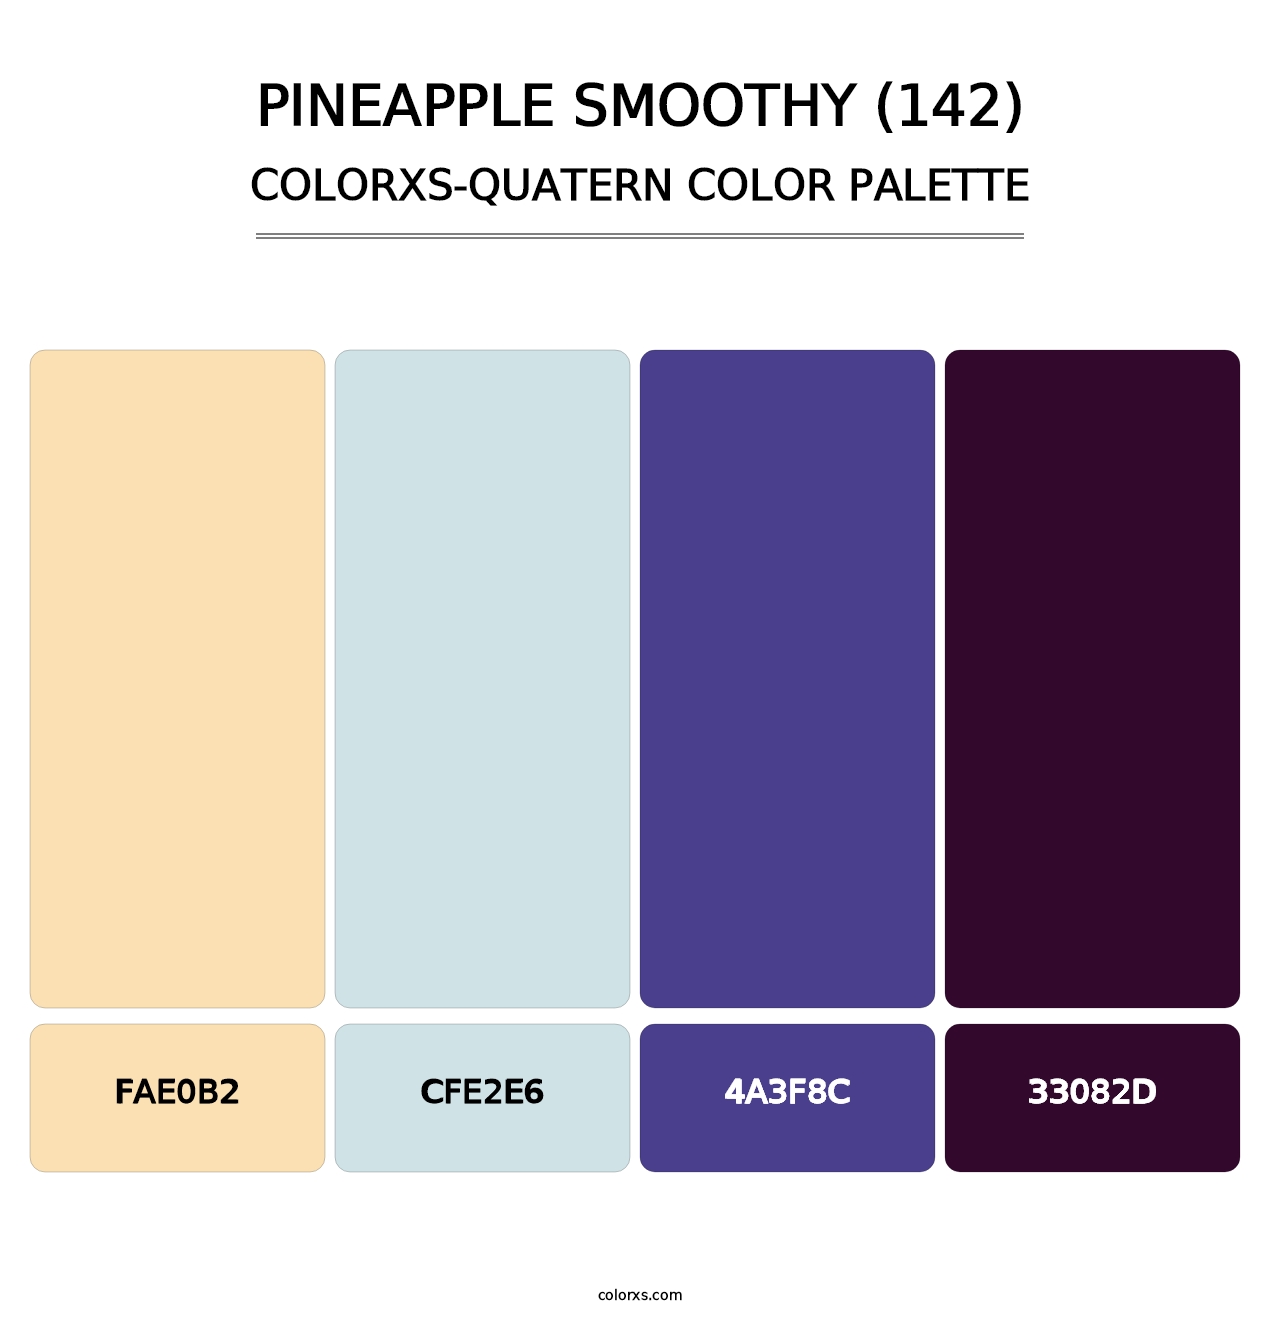 Pineapple Smoothy (142) - Colorxs Quatern Palette